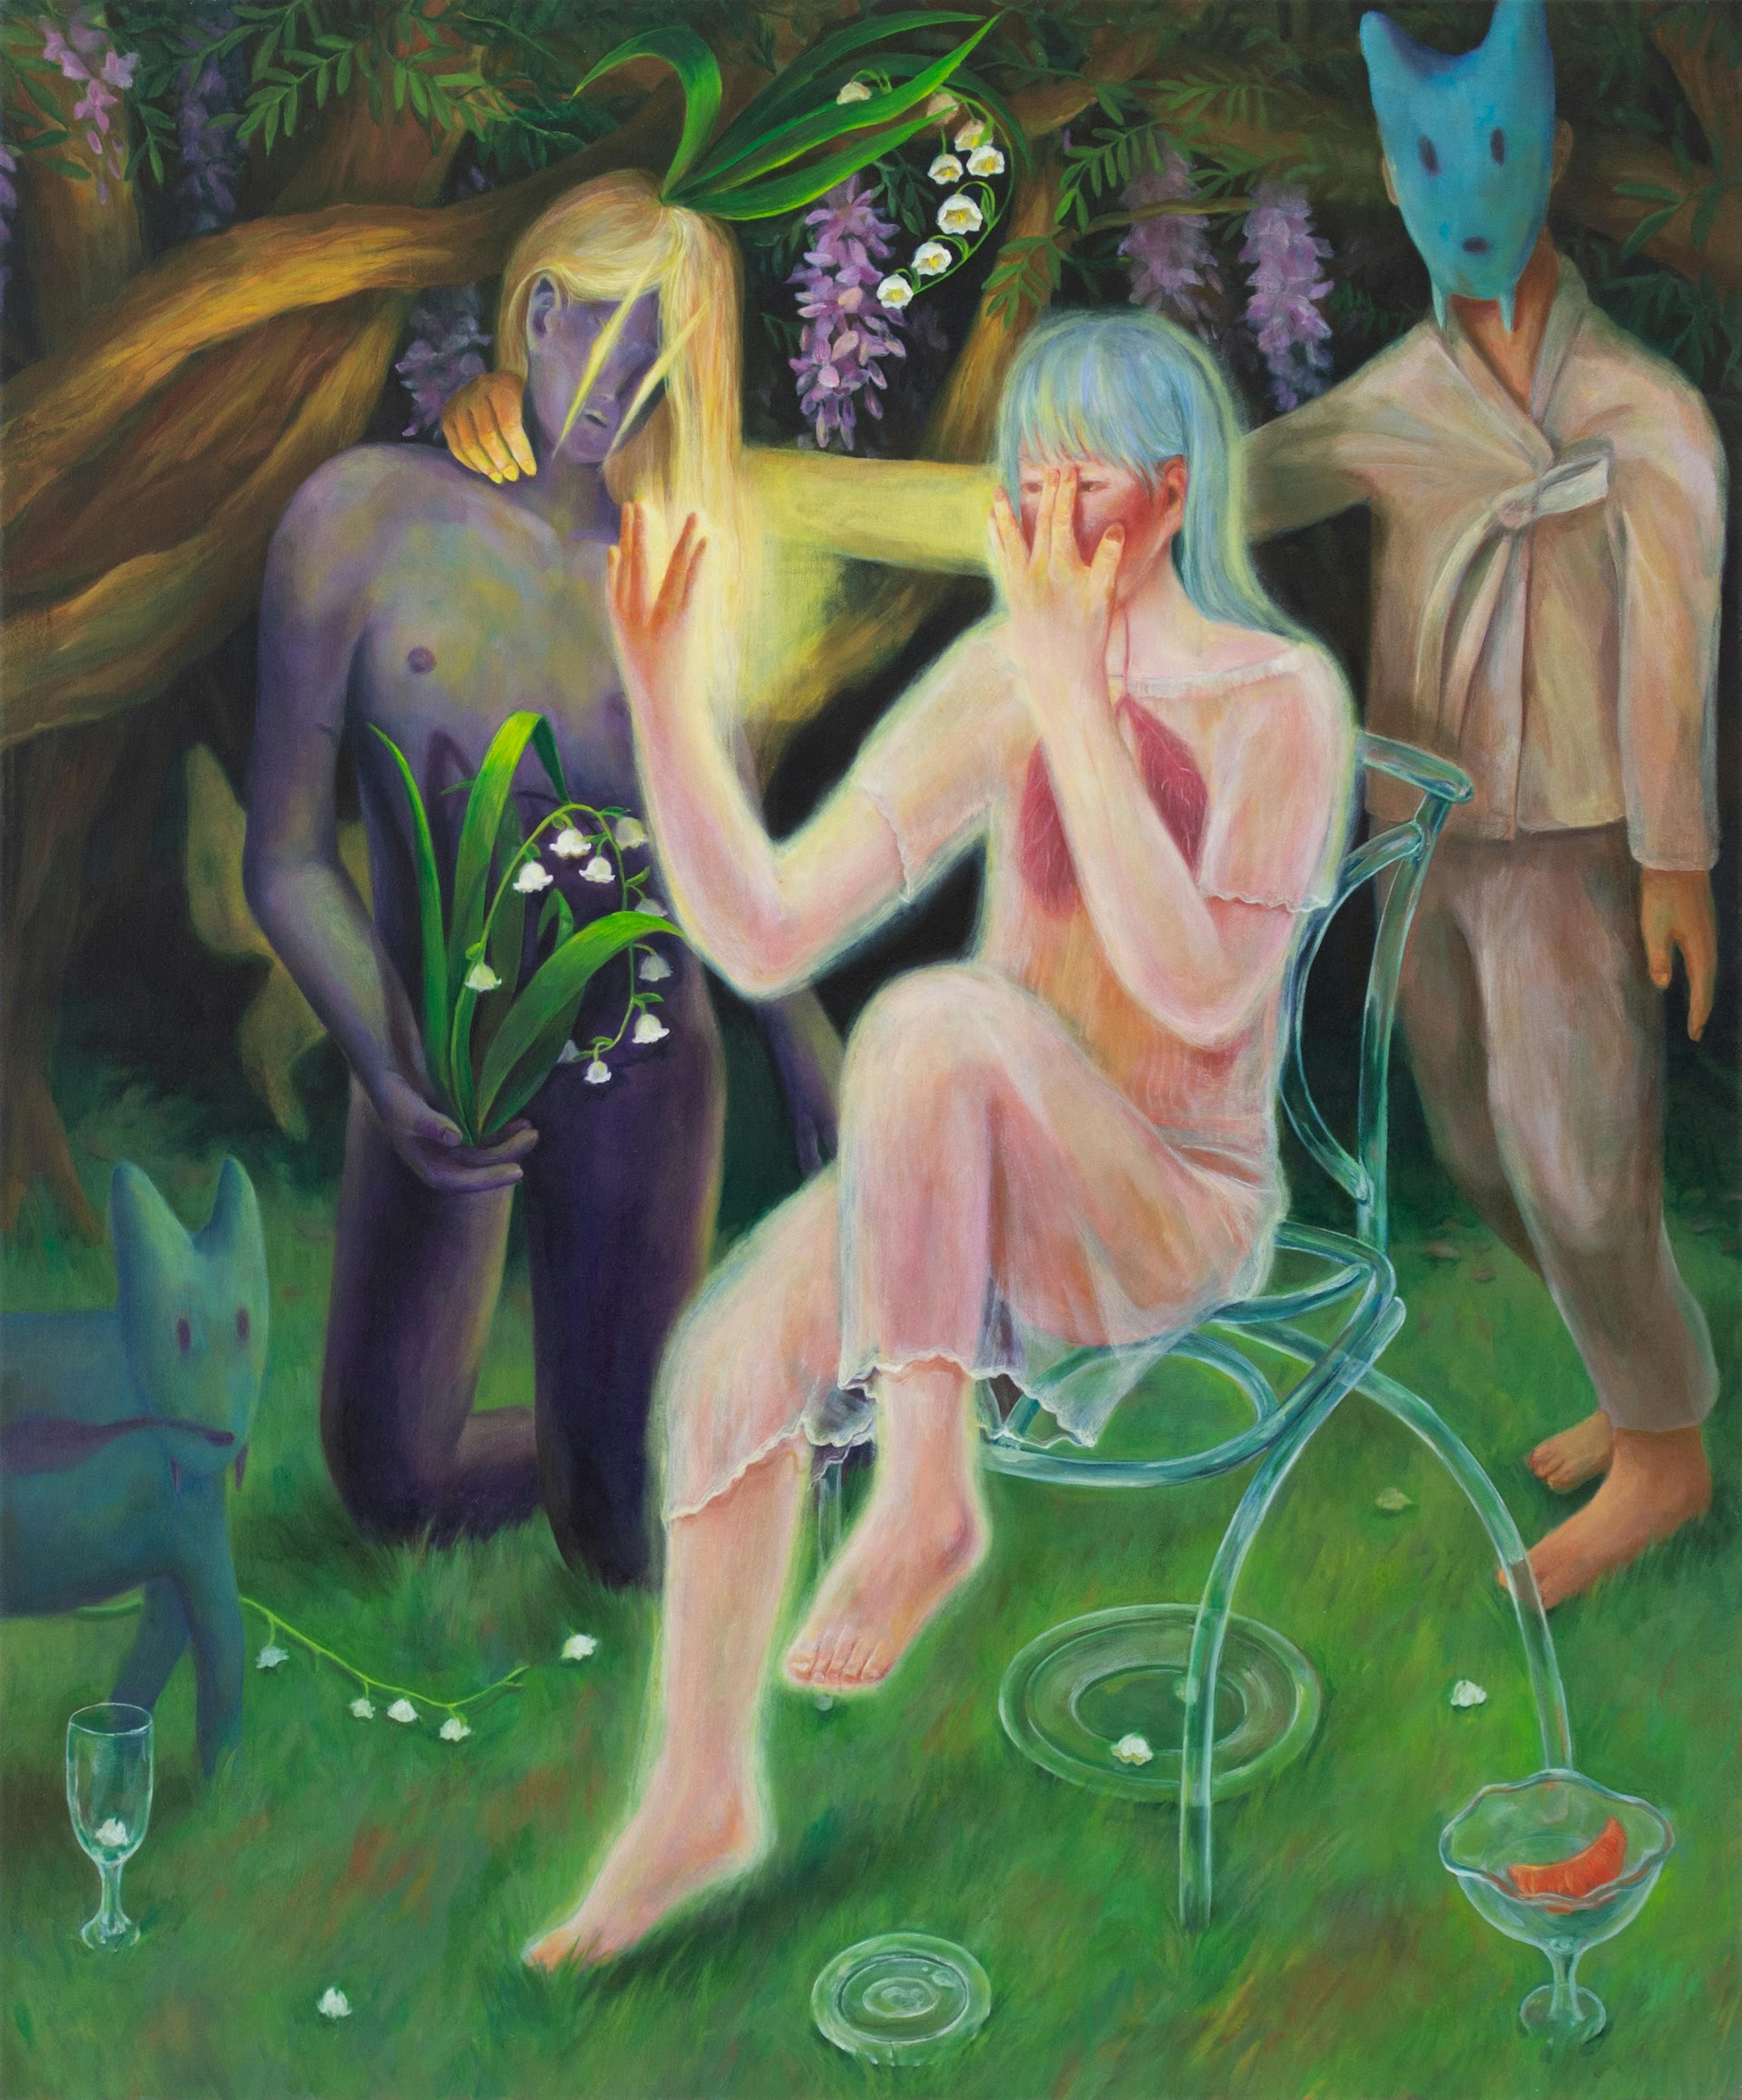 Return To Happiness, Oil on canvas, 140 x 130cm